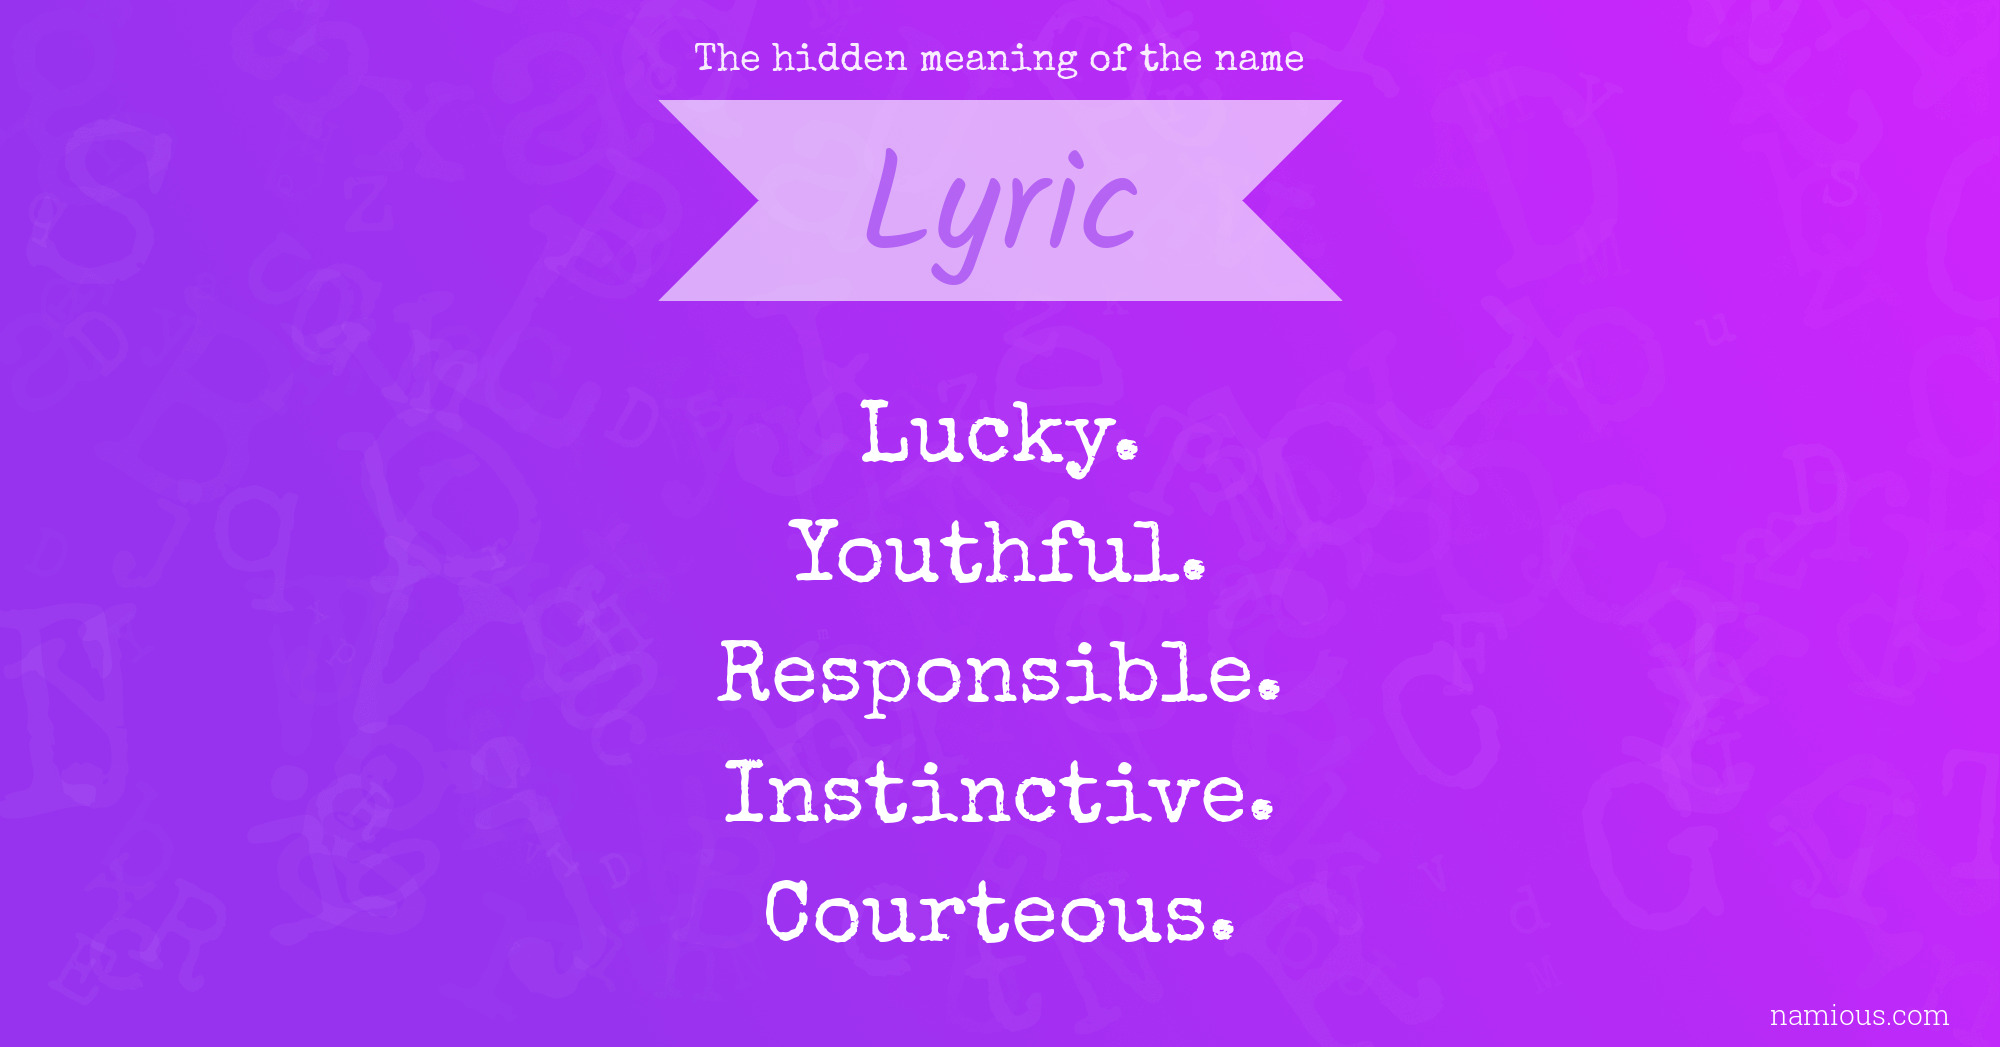 The hidden meaning of the name Lyric